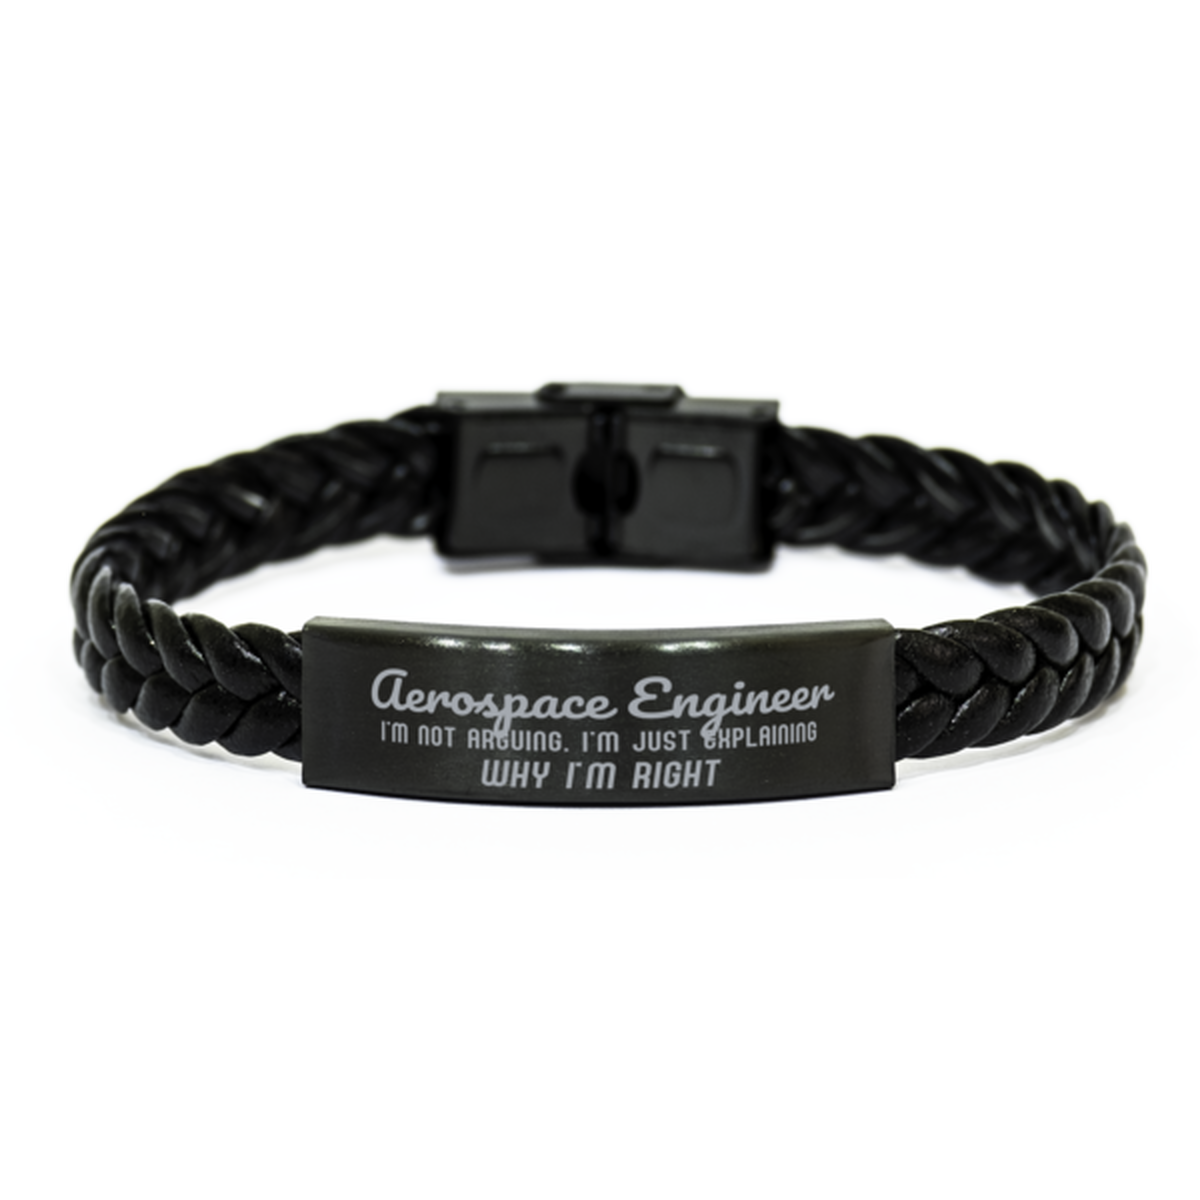 Aerospace Engineer I'm not Arguing. I'm Just Explaining Why I'm RIGHT Braided Leather Bracelet, Graduation Birthday Christmas Aerospace Engineer Gifts For Aerospace Engineer Funny Saying Quote Present for Men Women Coworker